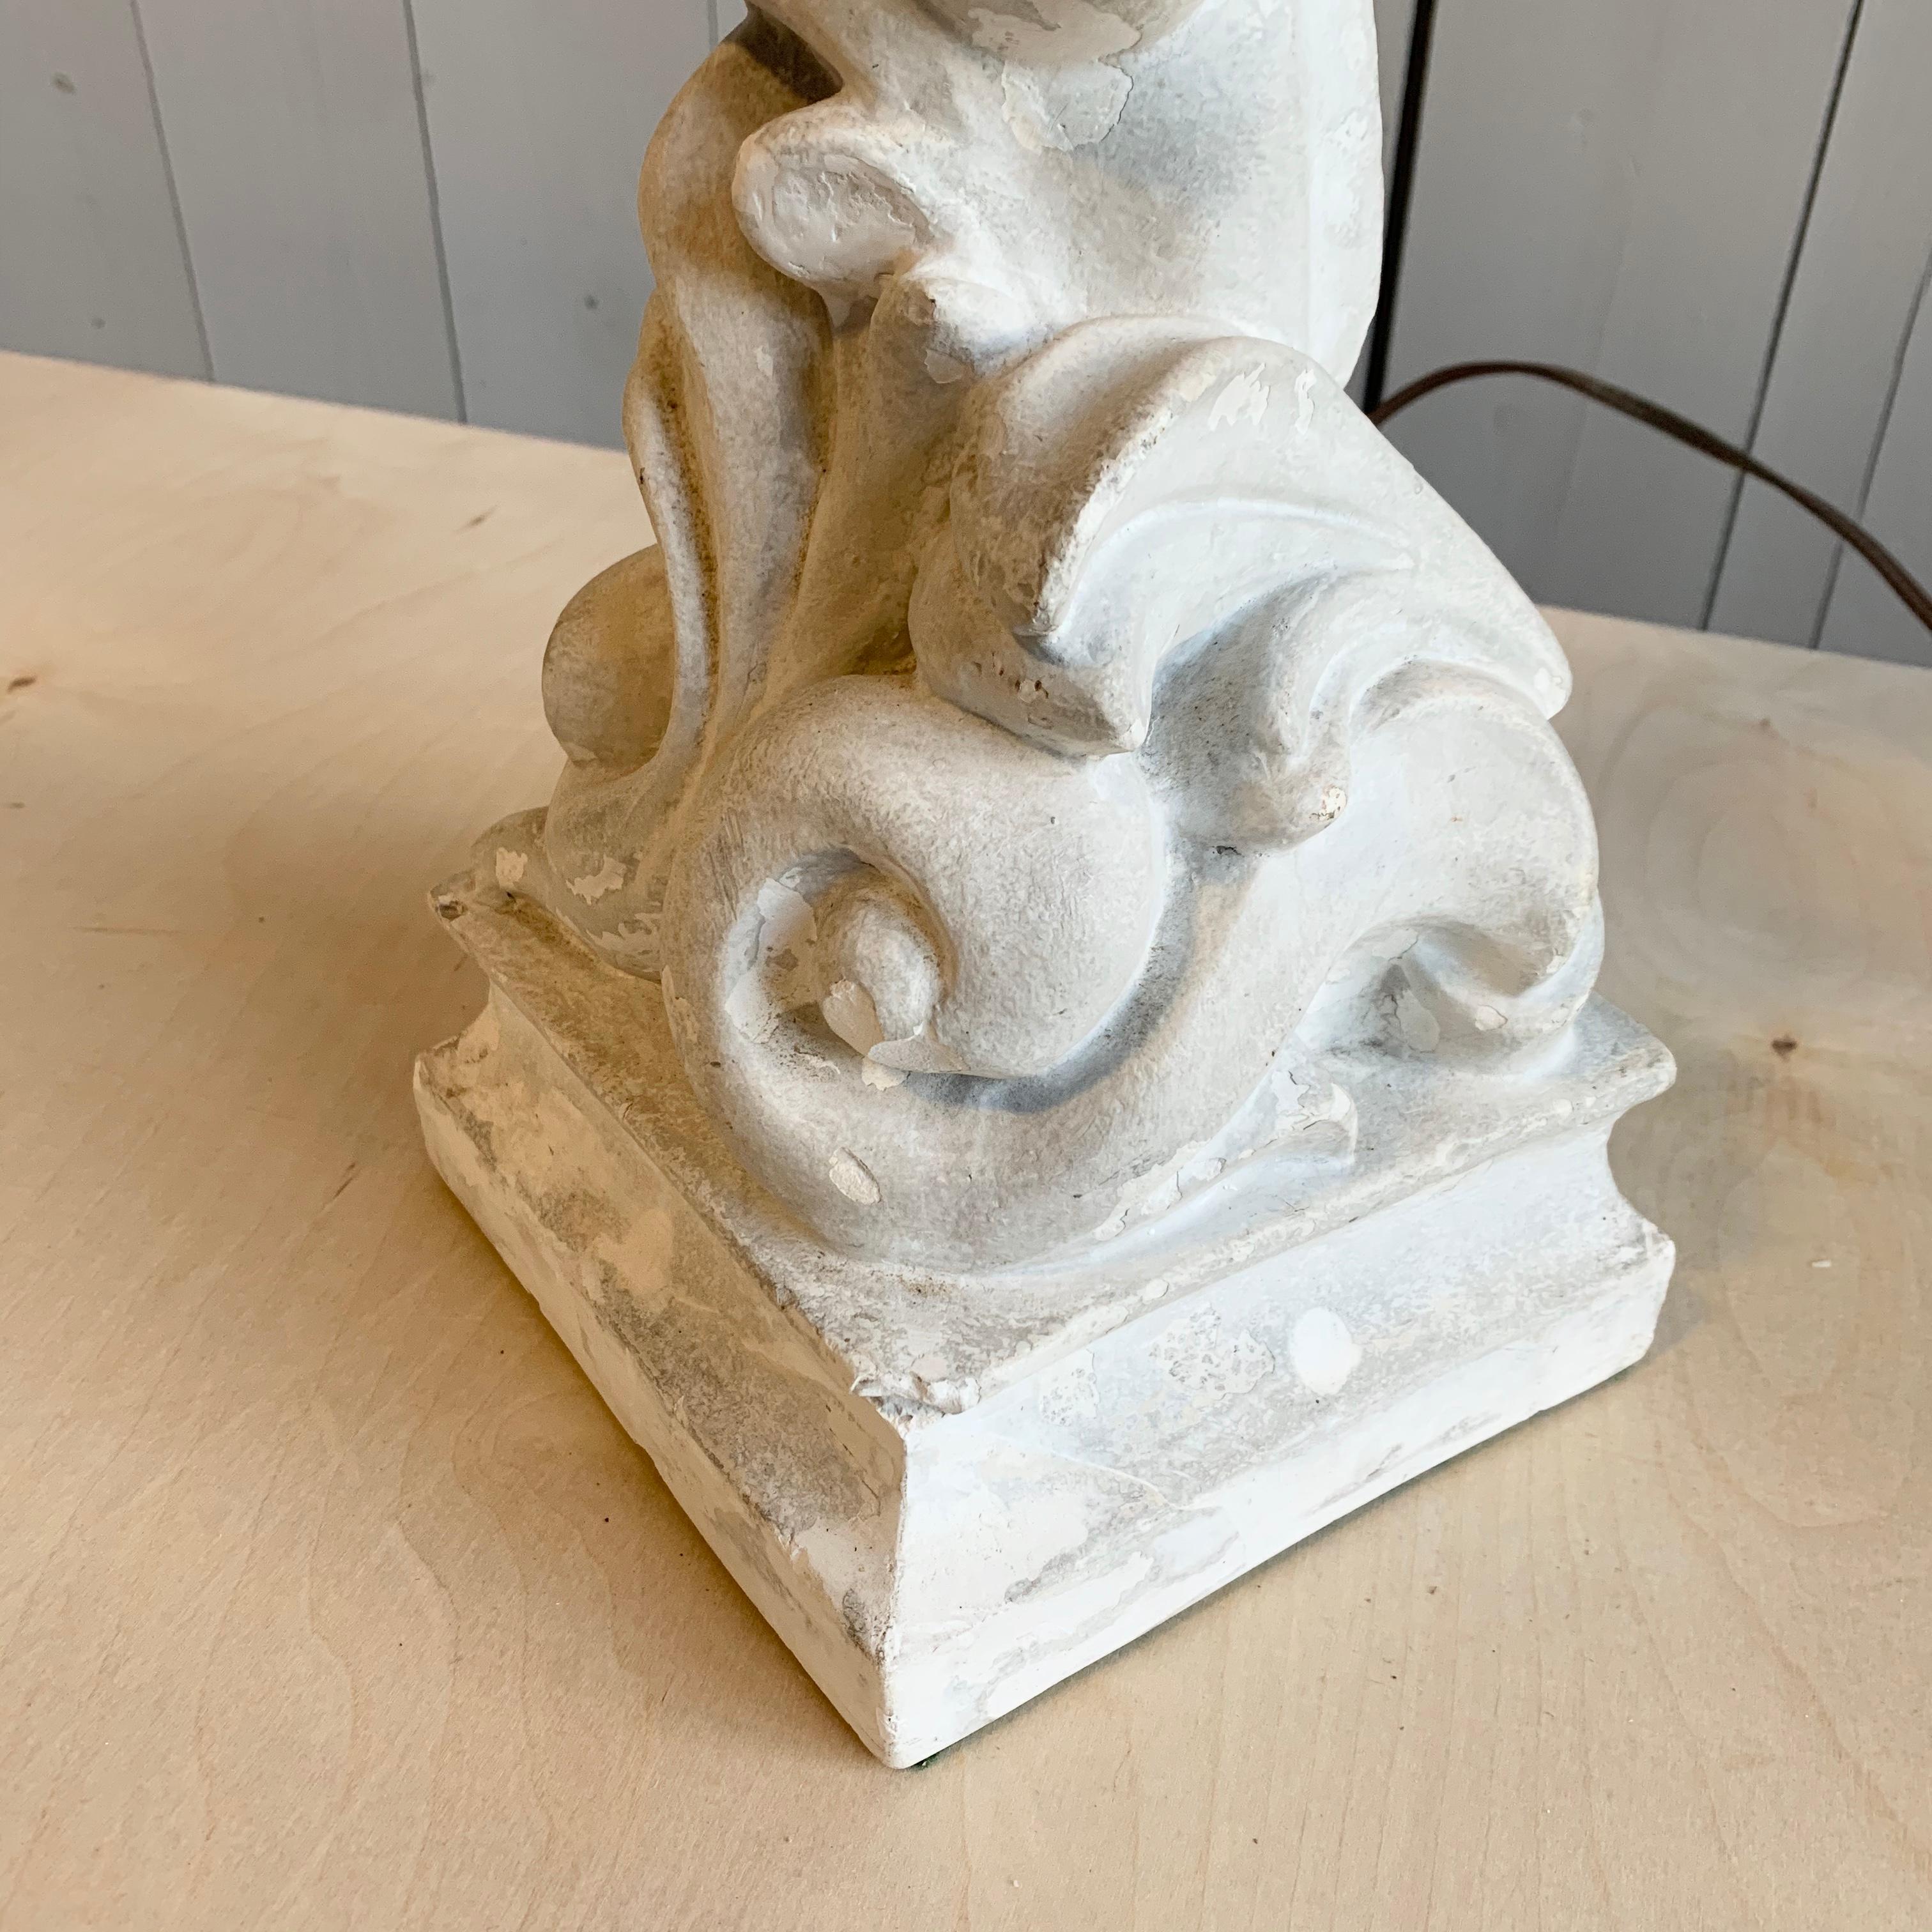 Table Lamp in Plaster, Serge Roche, 1940s For Sale 1